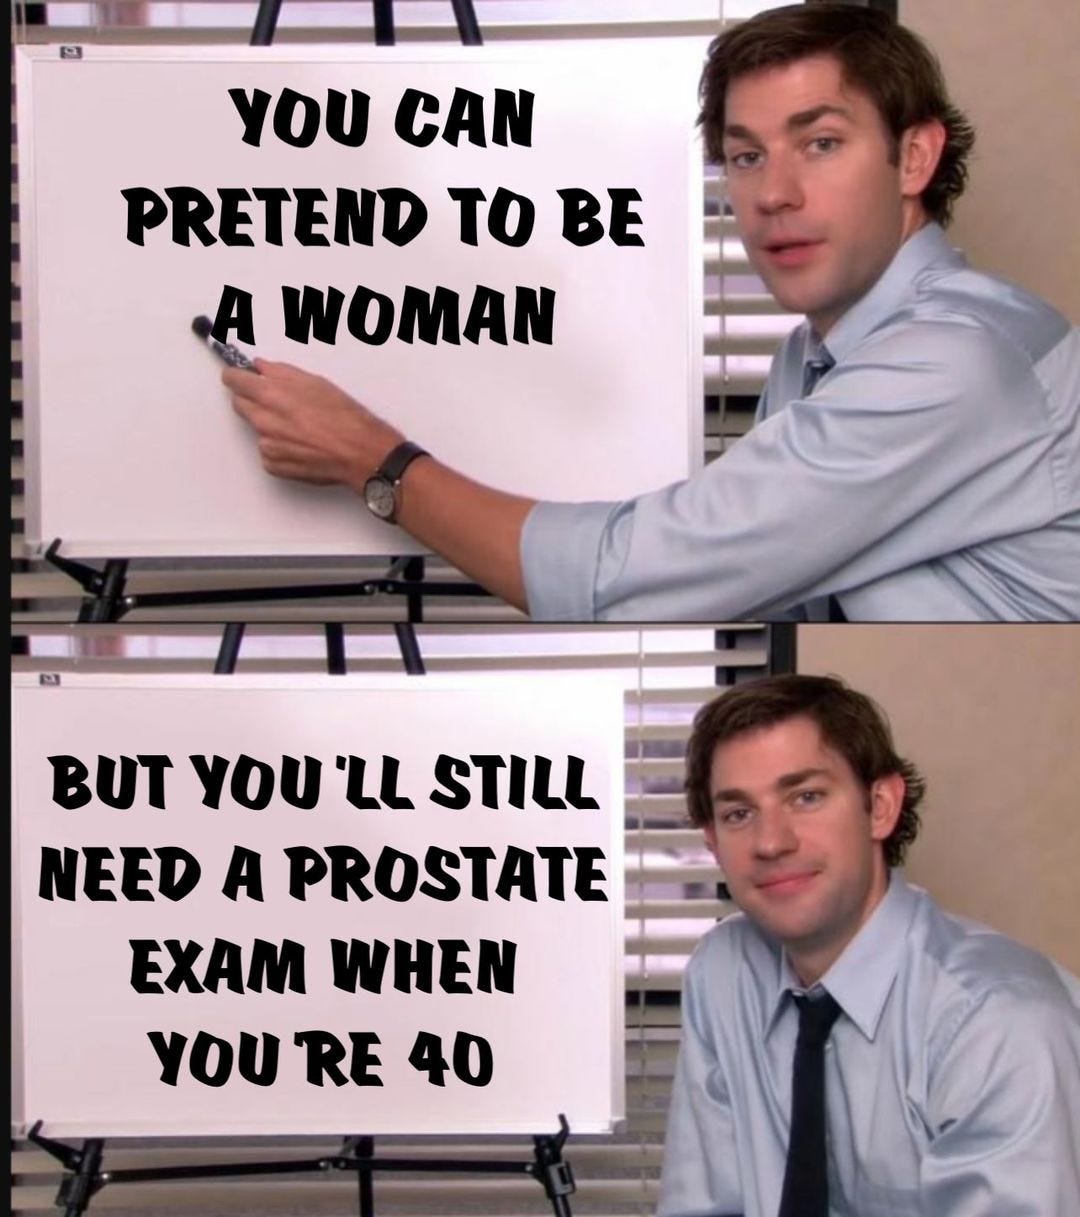 May be an image of 2 people and text that says 'YOU CAN PRETEND TO BE A WOMAN BUT YOU LL STILL NEED A PROSTATE EXAM WHEN YOU RE 40'